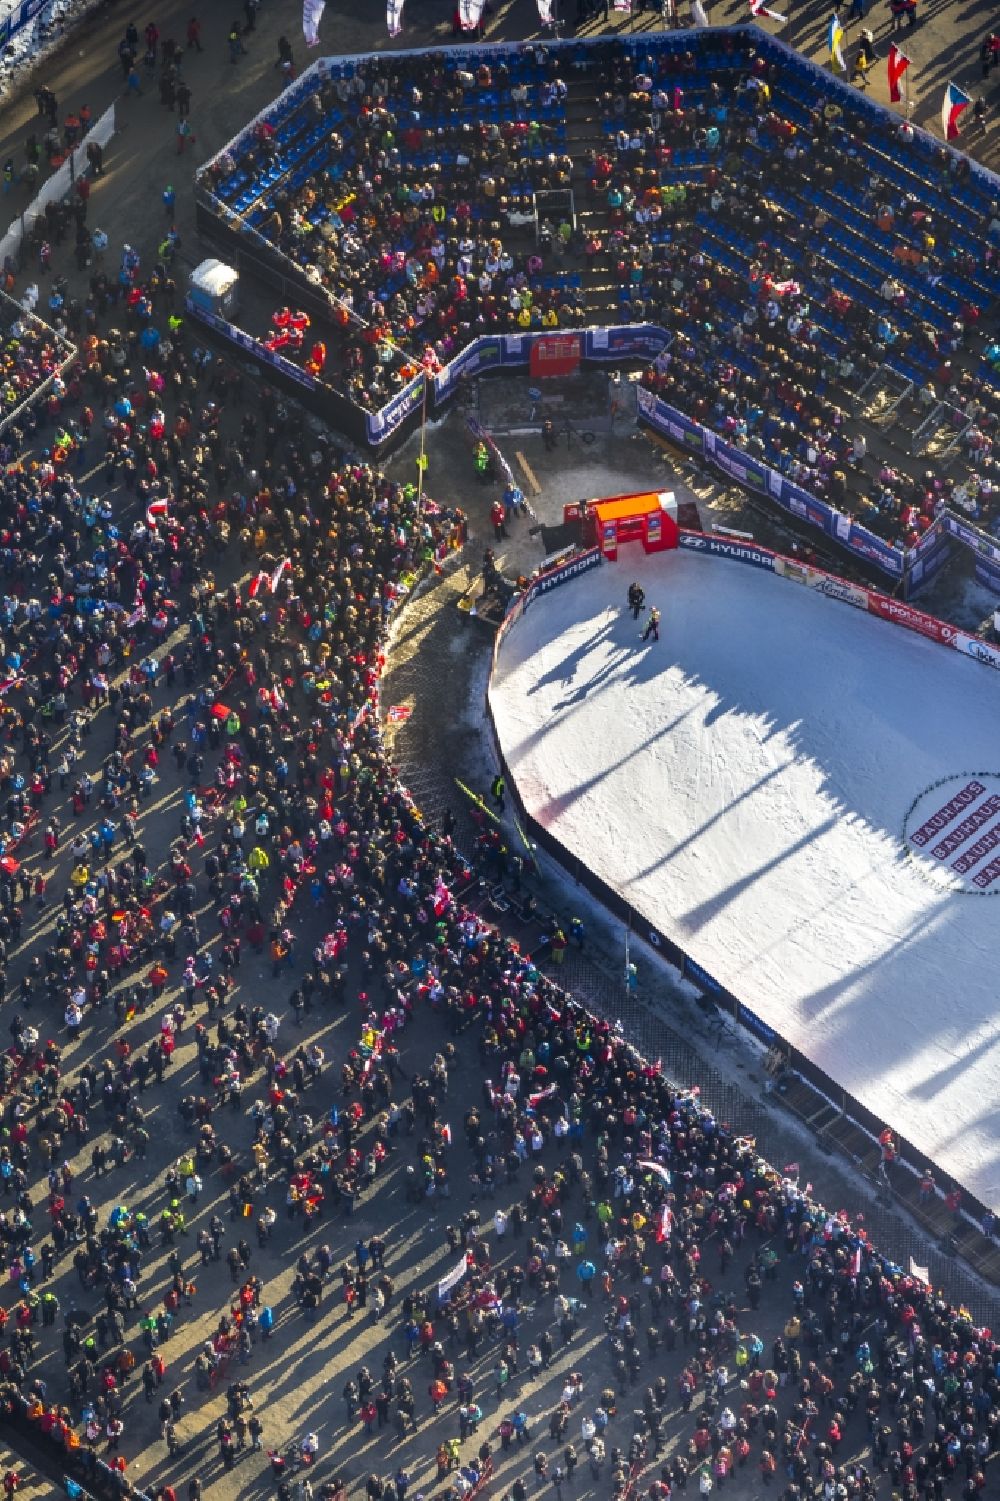 Willingen from the bird's eye view: Ski jumping at the World Ski Cup in Willingen 2014 in Willingen ( Upland ) in Hesse - Germany